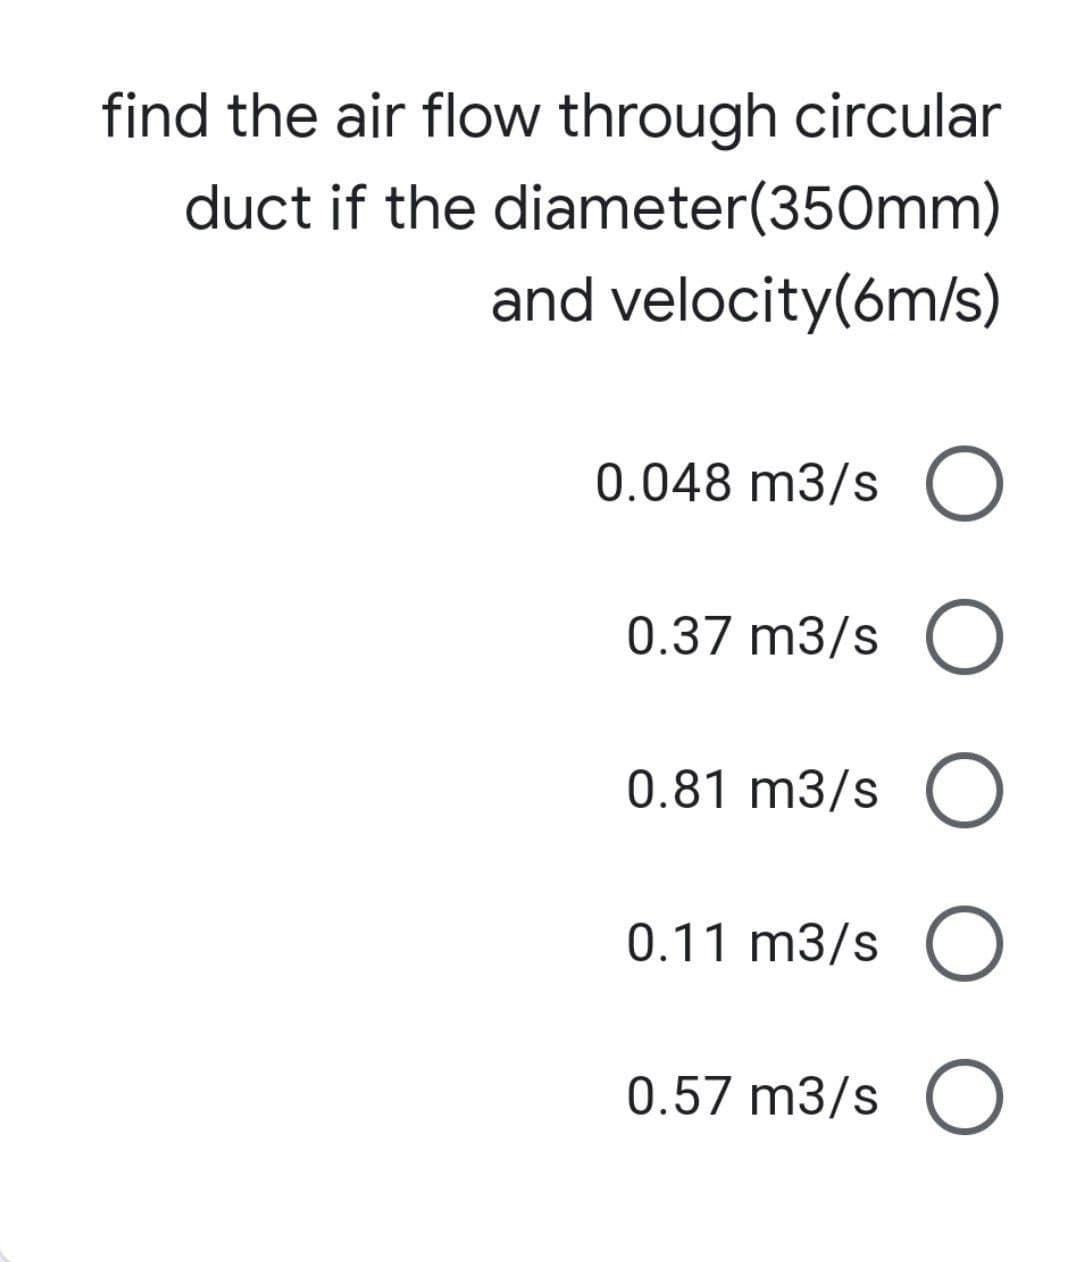 find the air flow through circular
duct if the diameter(350mm)
and velocity(6m/s)
0.048 m3/s O
0.37 m3/s O
0.81 m3/s O
0.11 m3/s O
0.57 m3/s O
